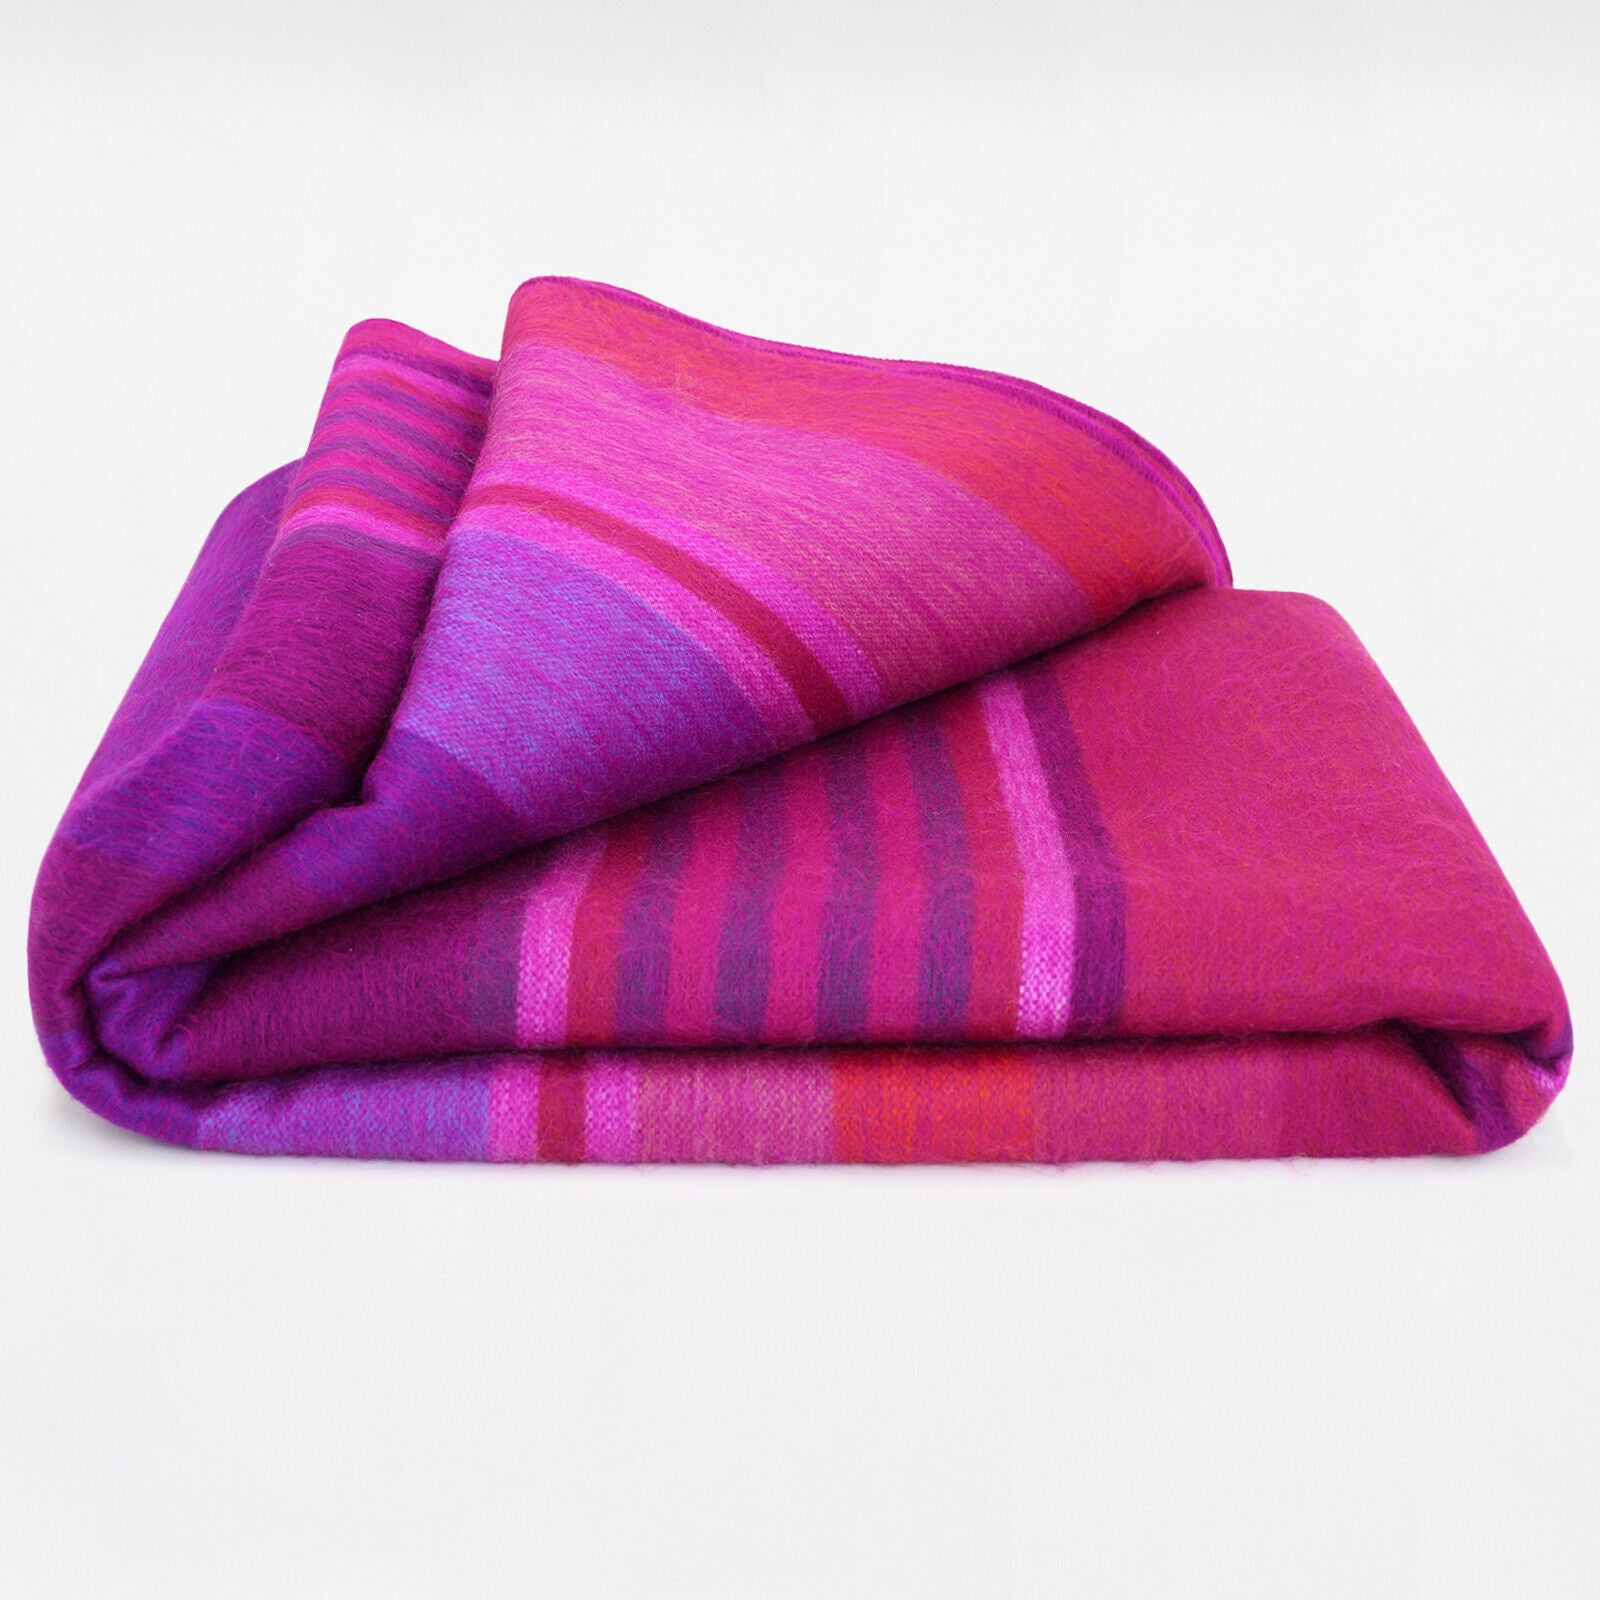 Chone - Baby Alpaca Wool Throw Blanket / Sofa Cover - Queen Size 97" x 69" - Vibrant Purples & Rich Pinks